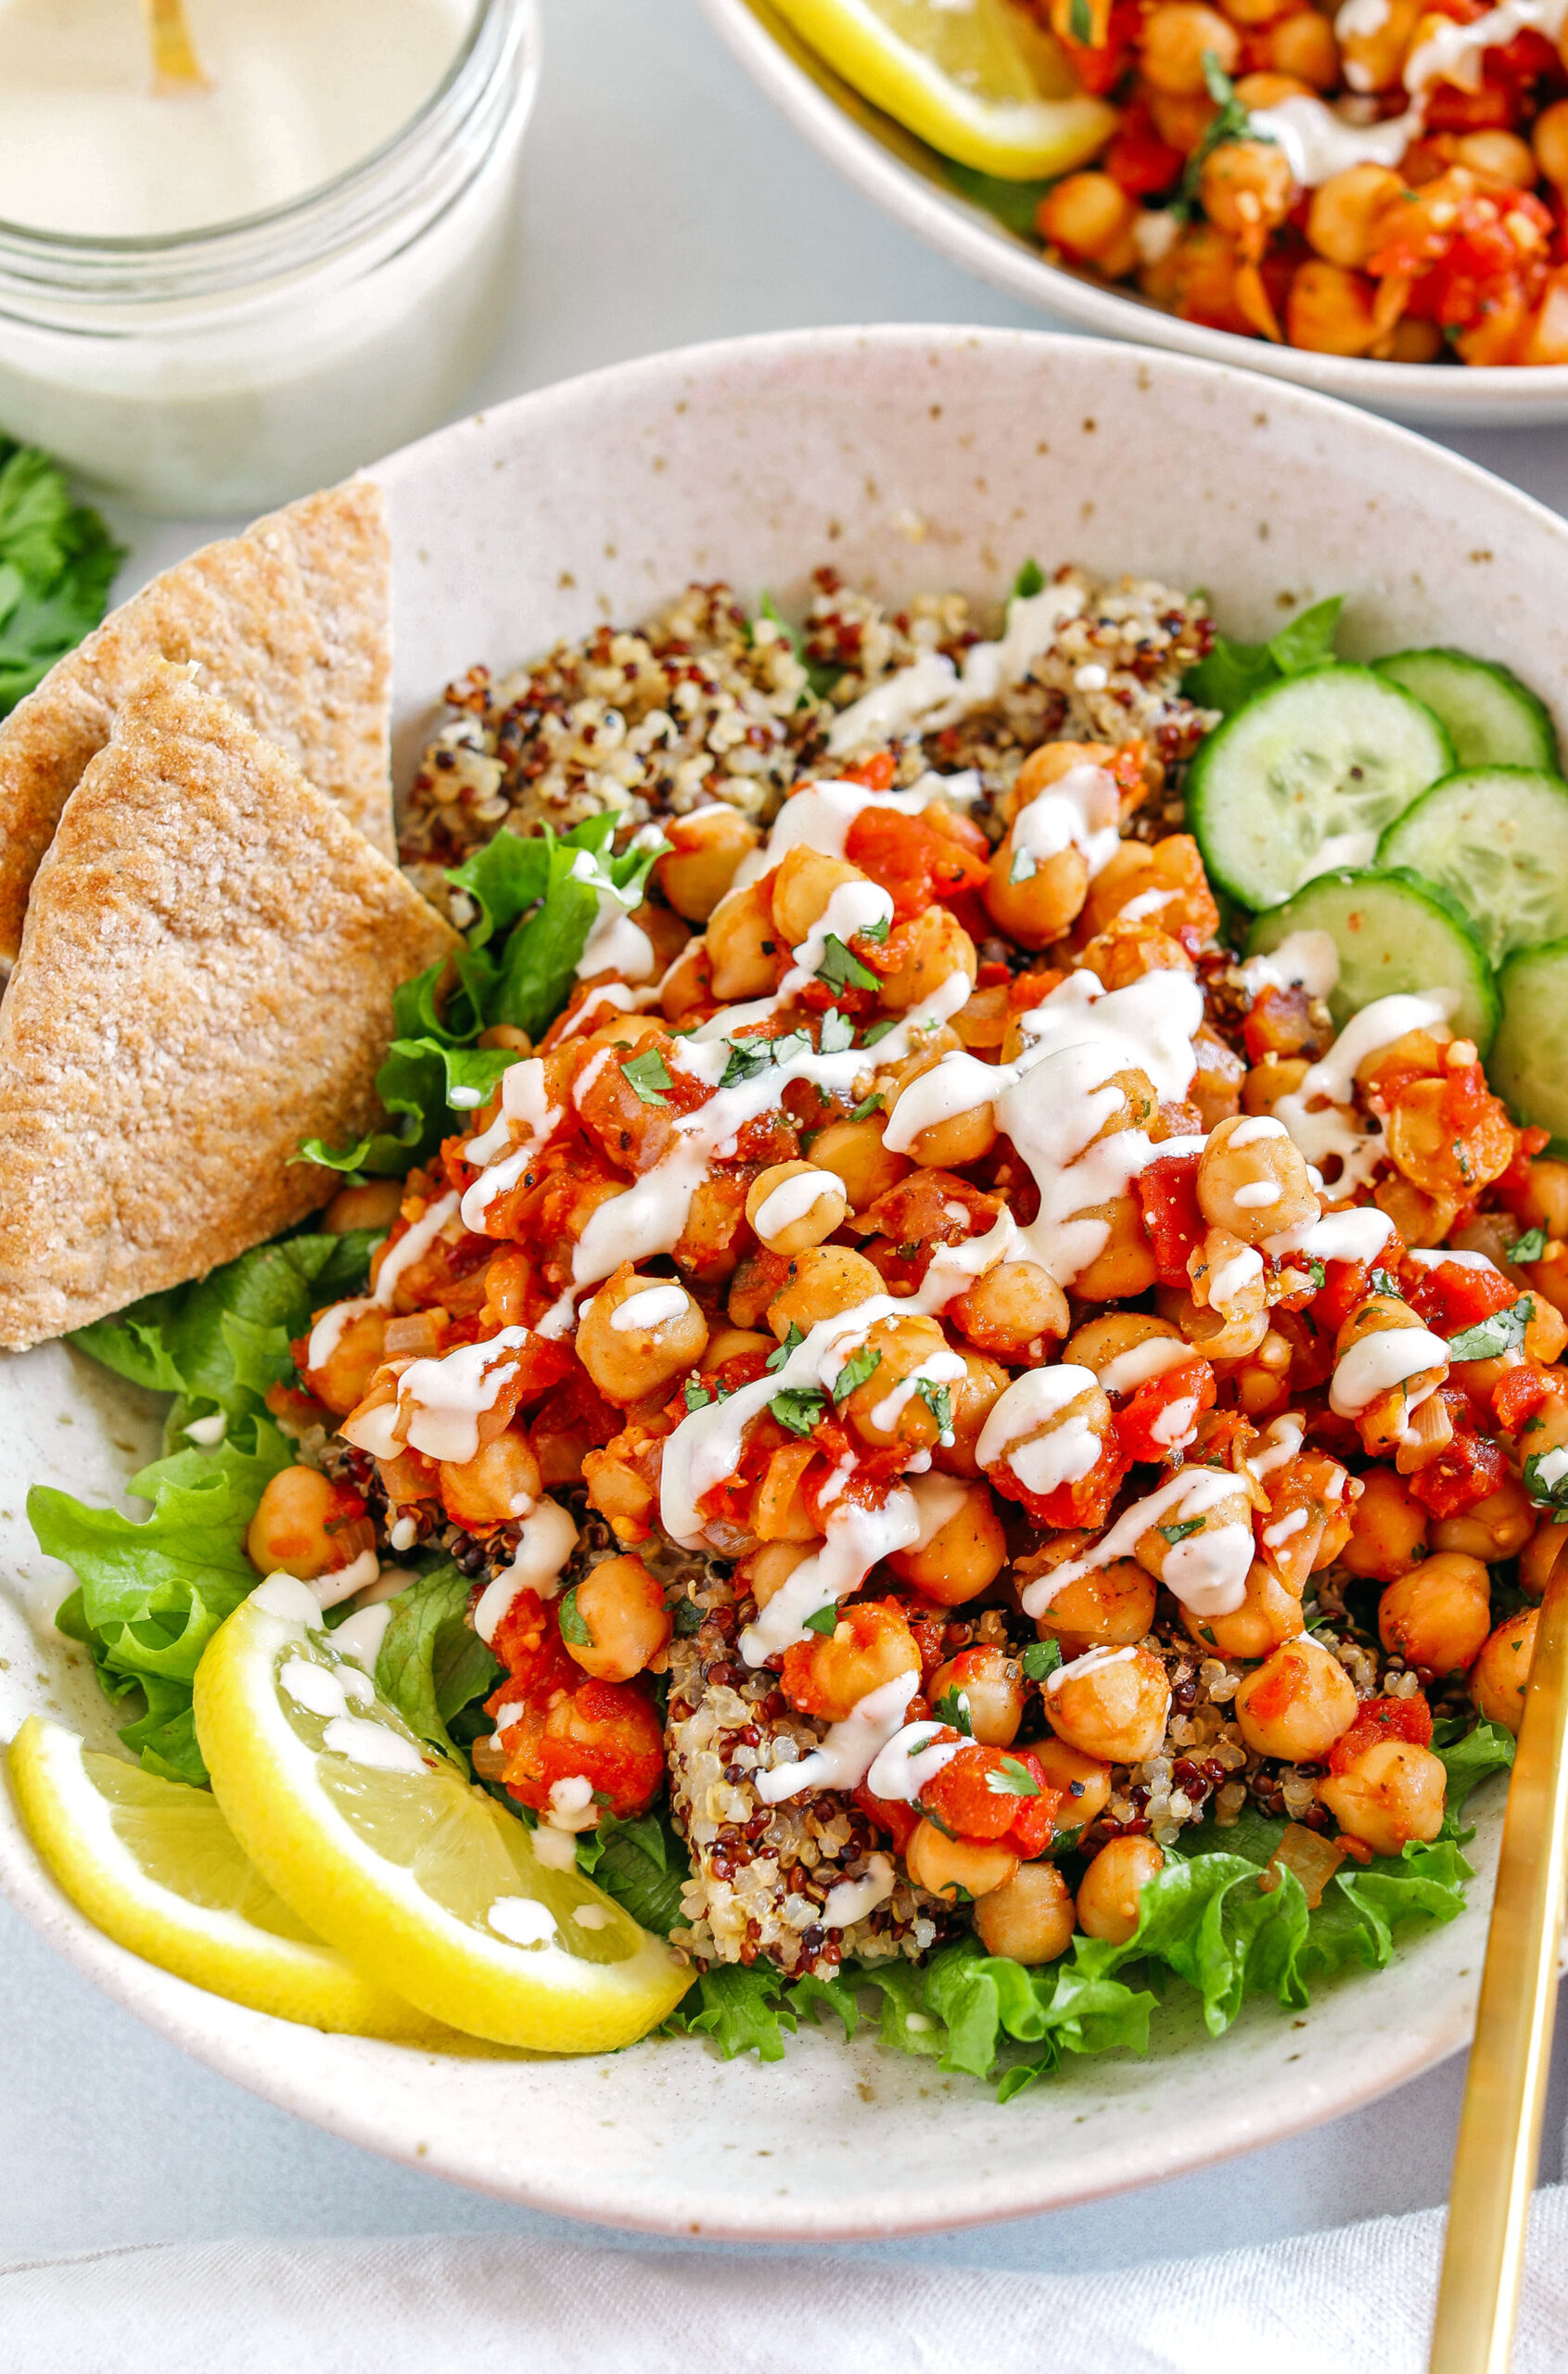 Protein-packed Spicy Chickpea Quinoa Bowls are loaded with flavor, perfect for meal prep and are easily made in just 20 minutes!  Drizzle my lemony tahini dressing over top for even more flavor!